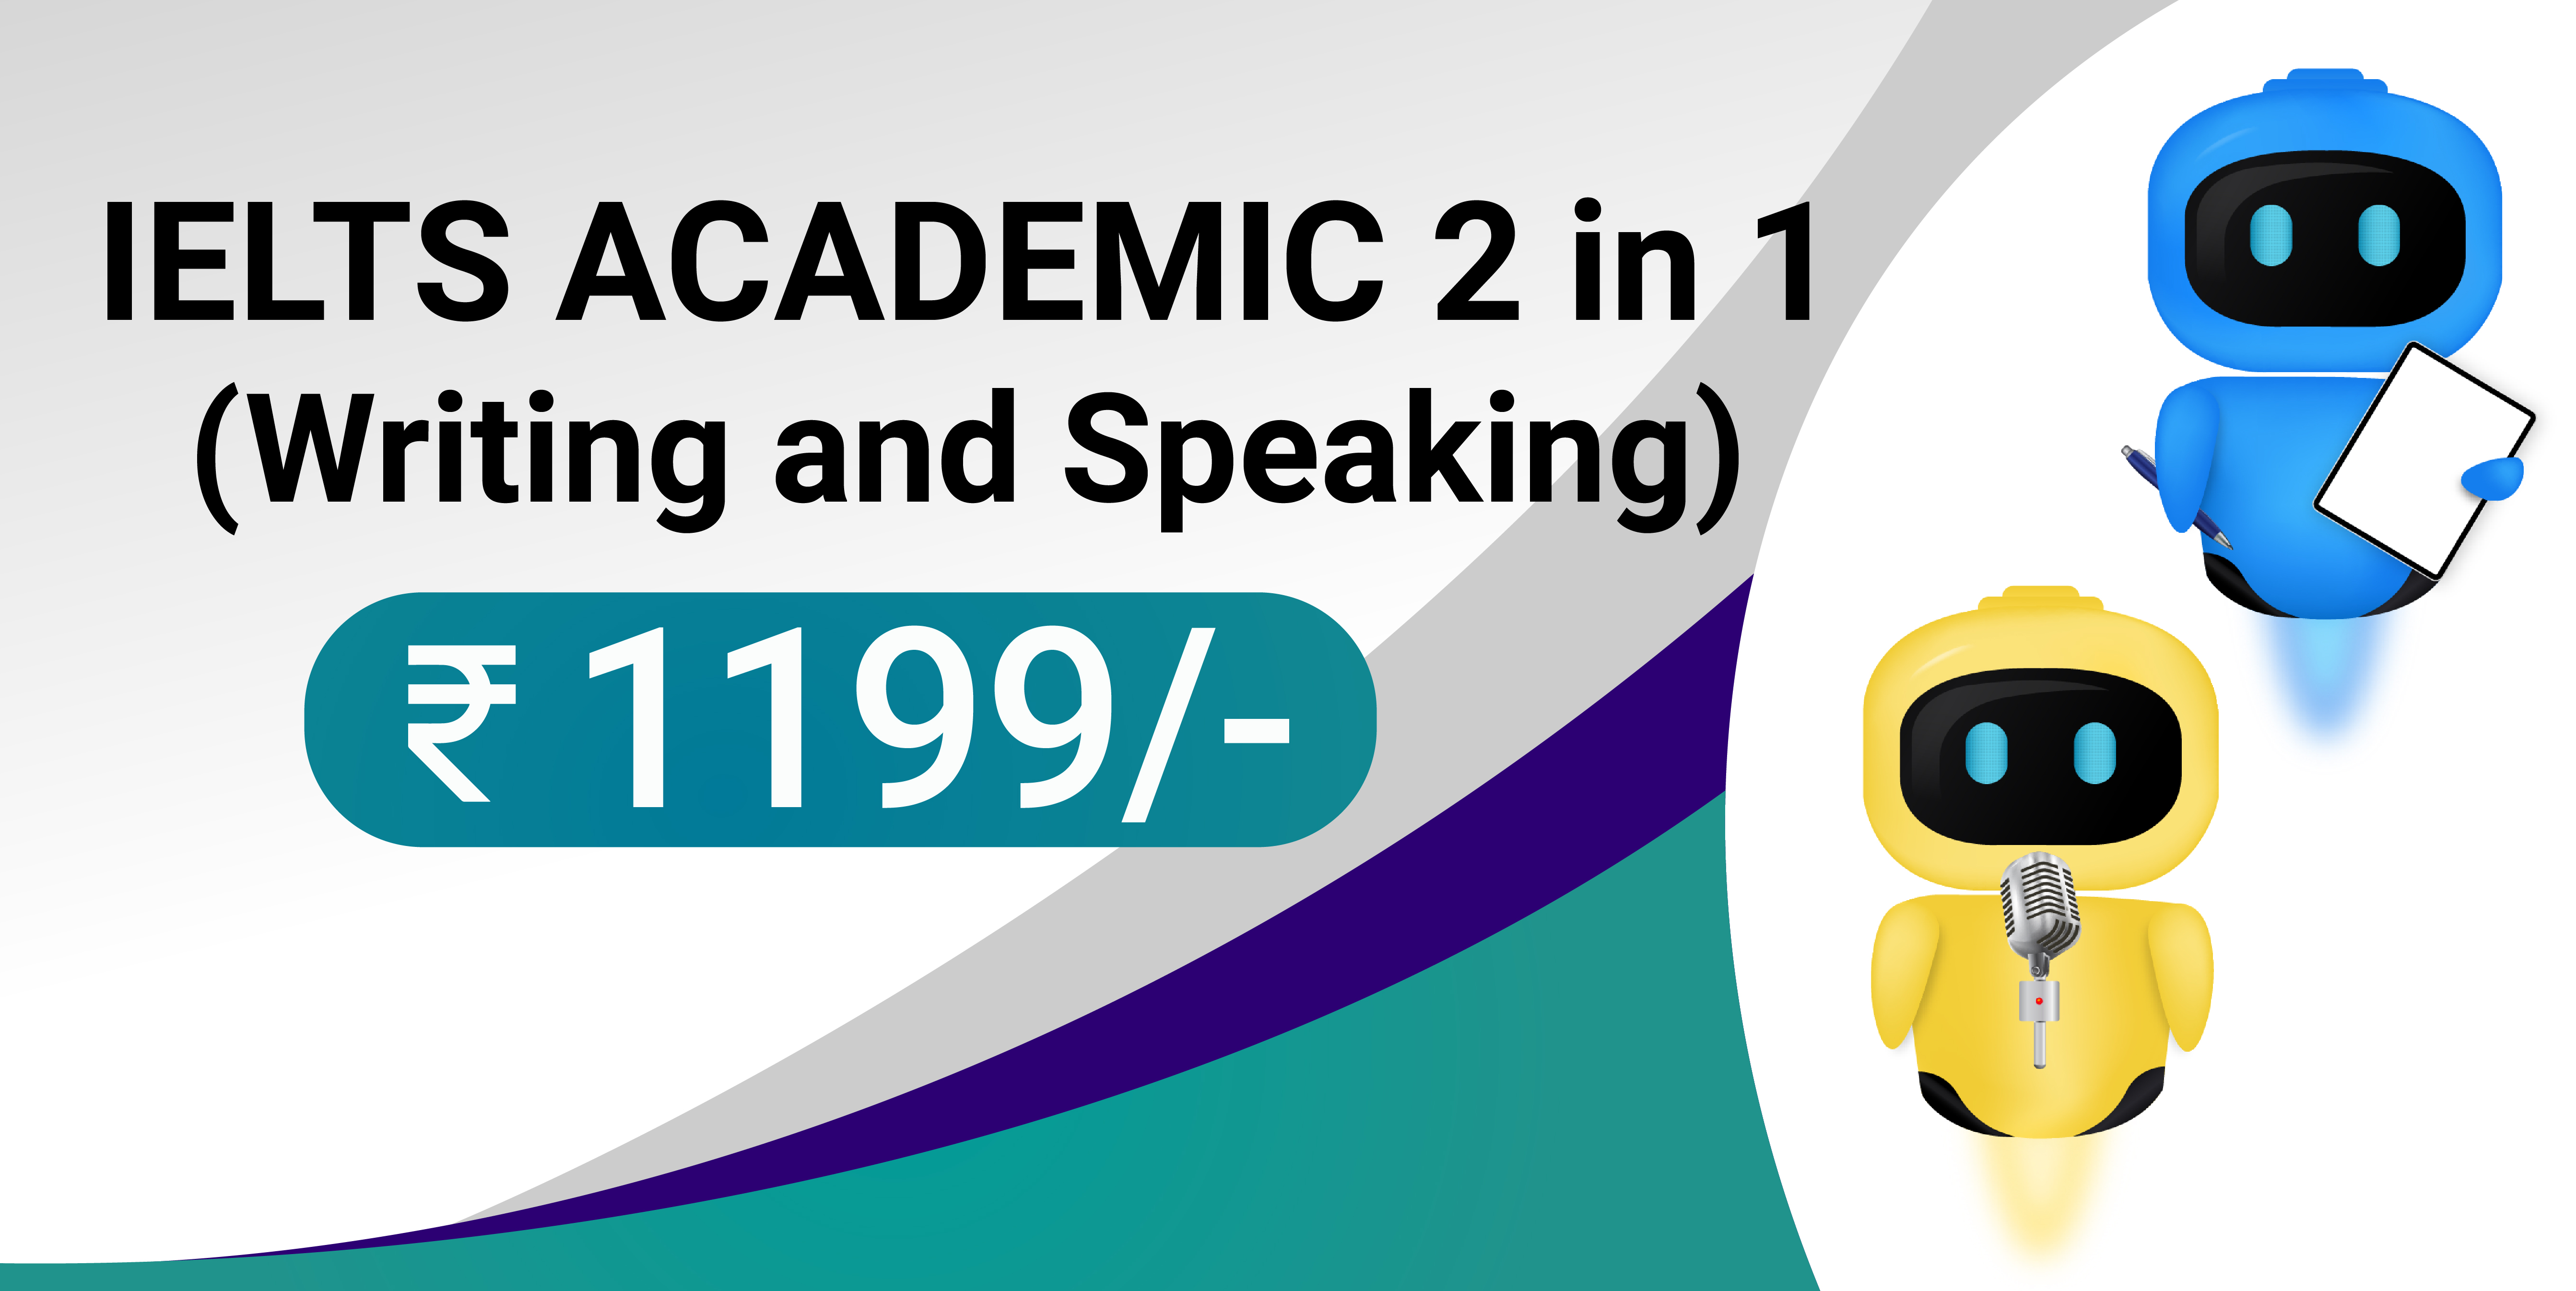 IELTS ACADEMIC 2 in 1 (Writing and Speaking)